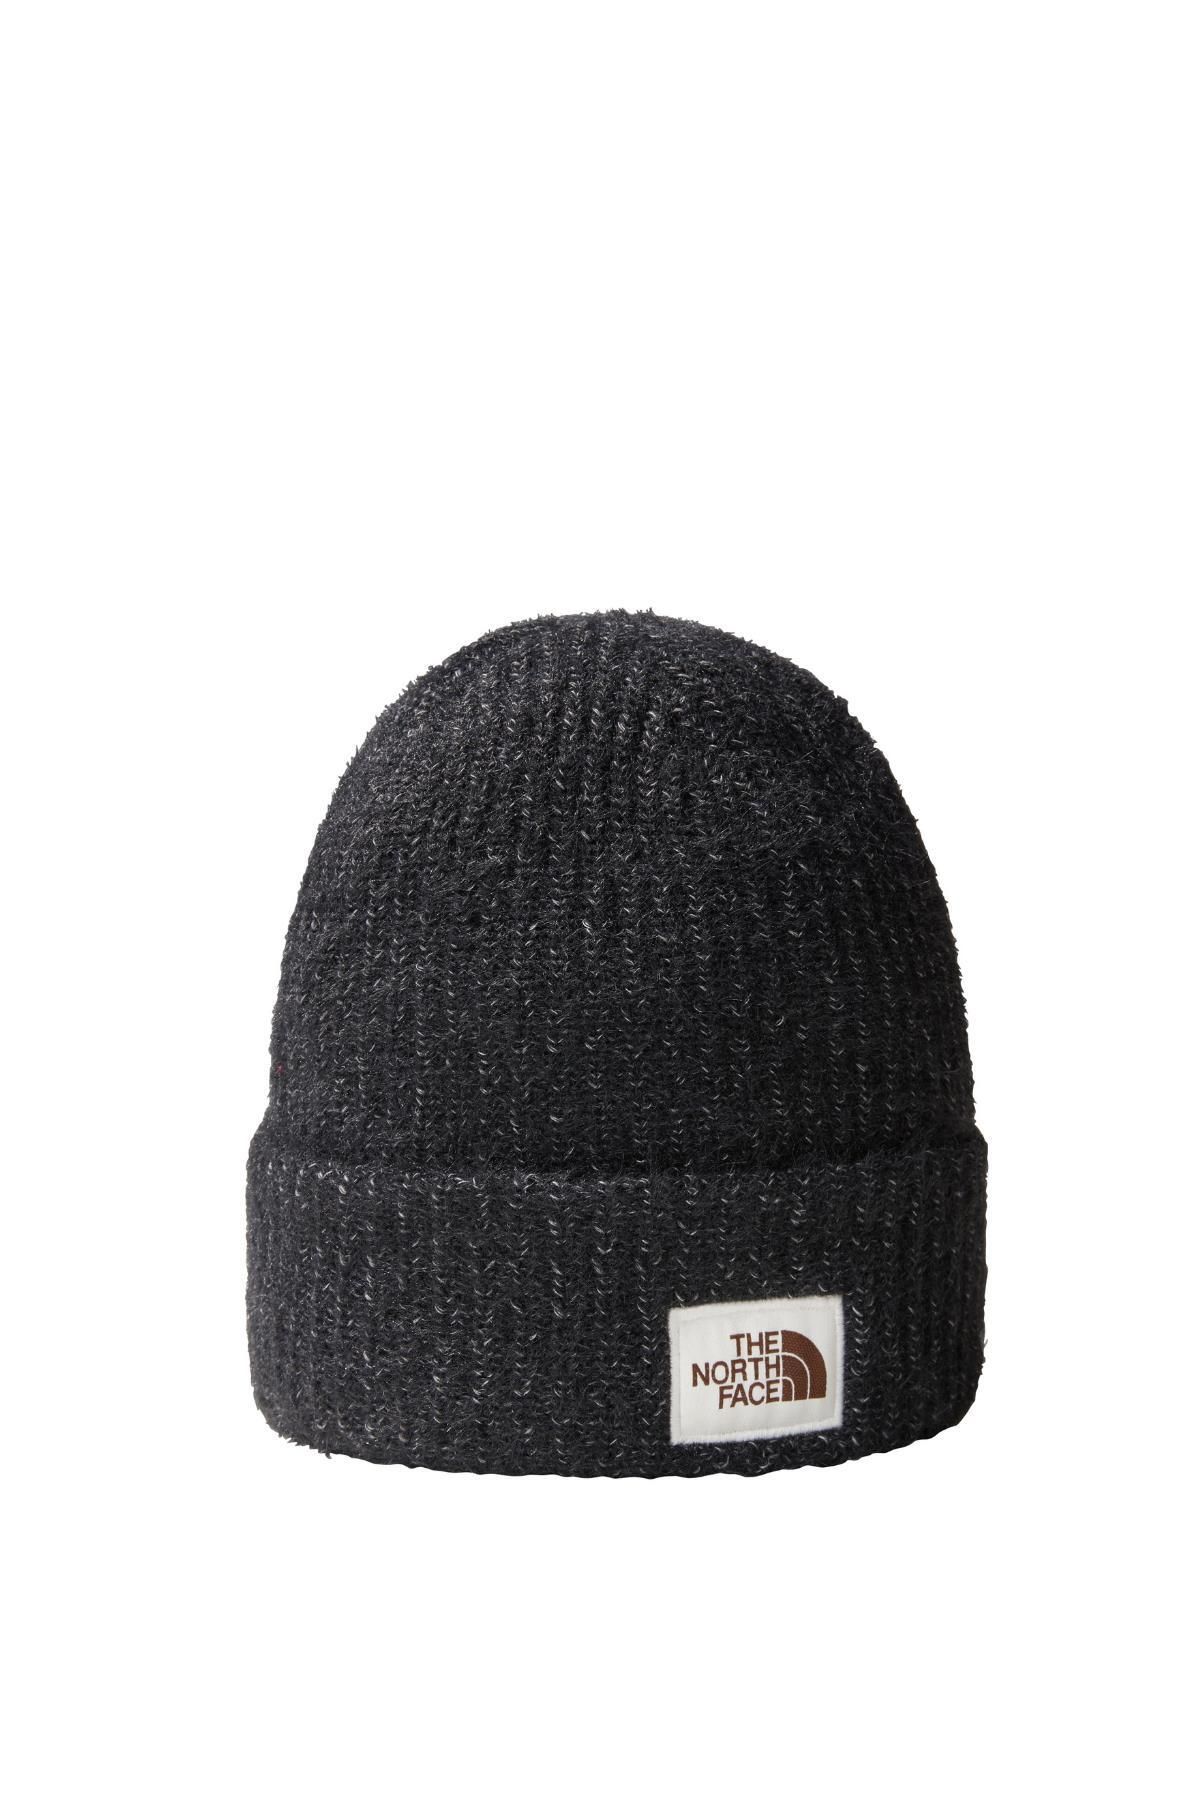 The North Face Salty Bae Lined Beanie Bere Siyah